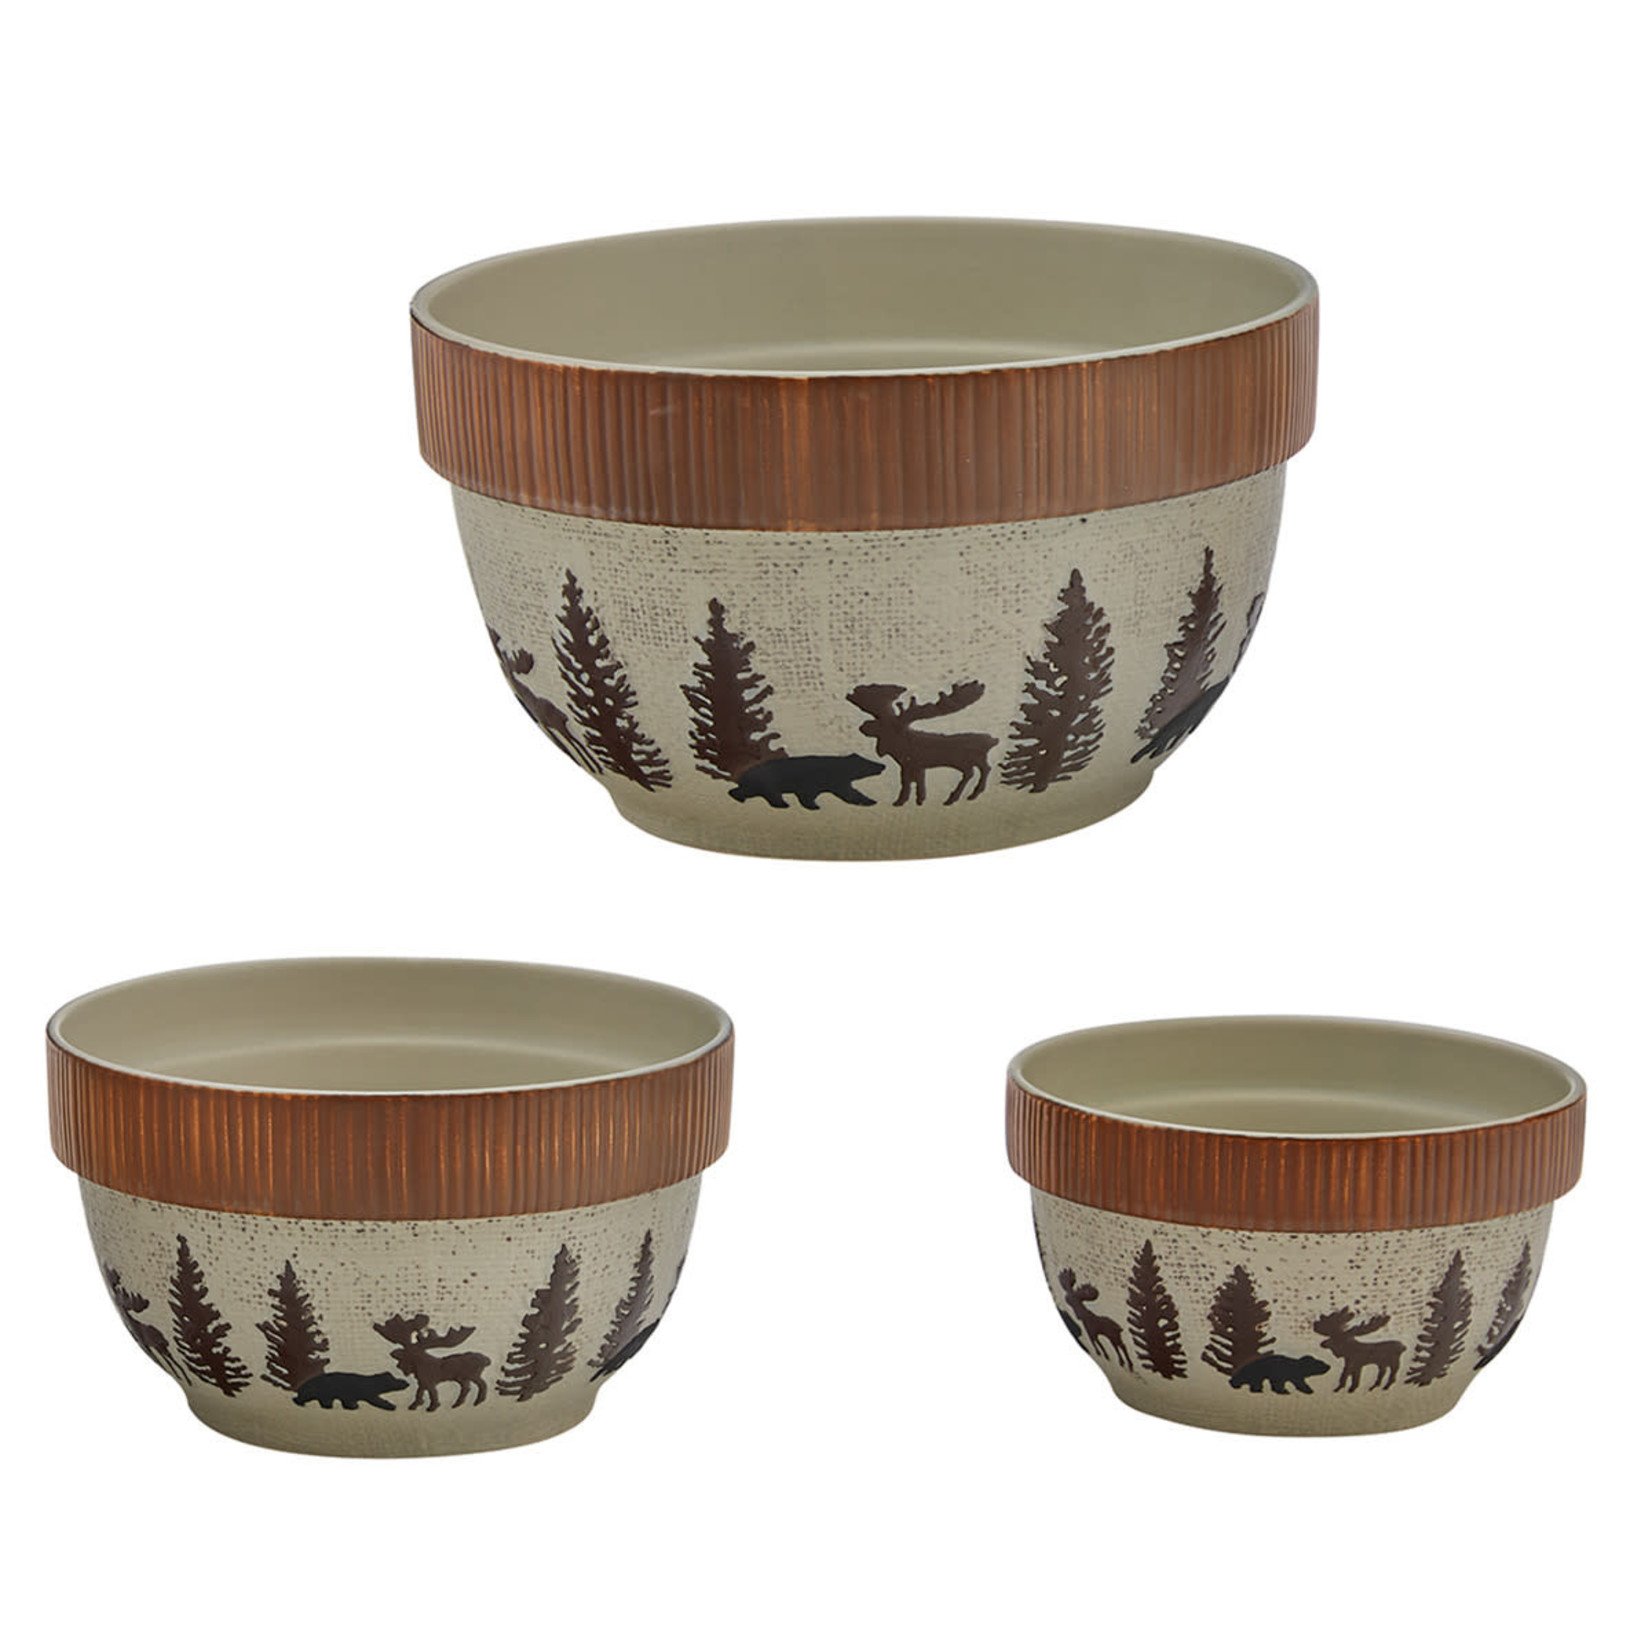 Wilderness trail mixing bowls